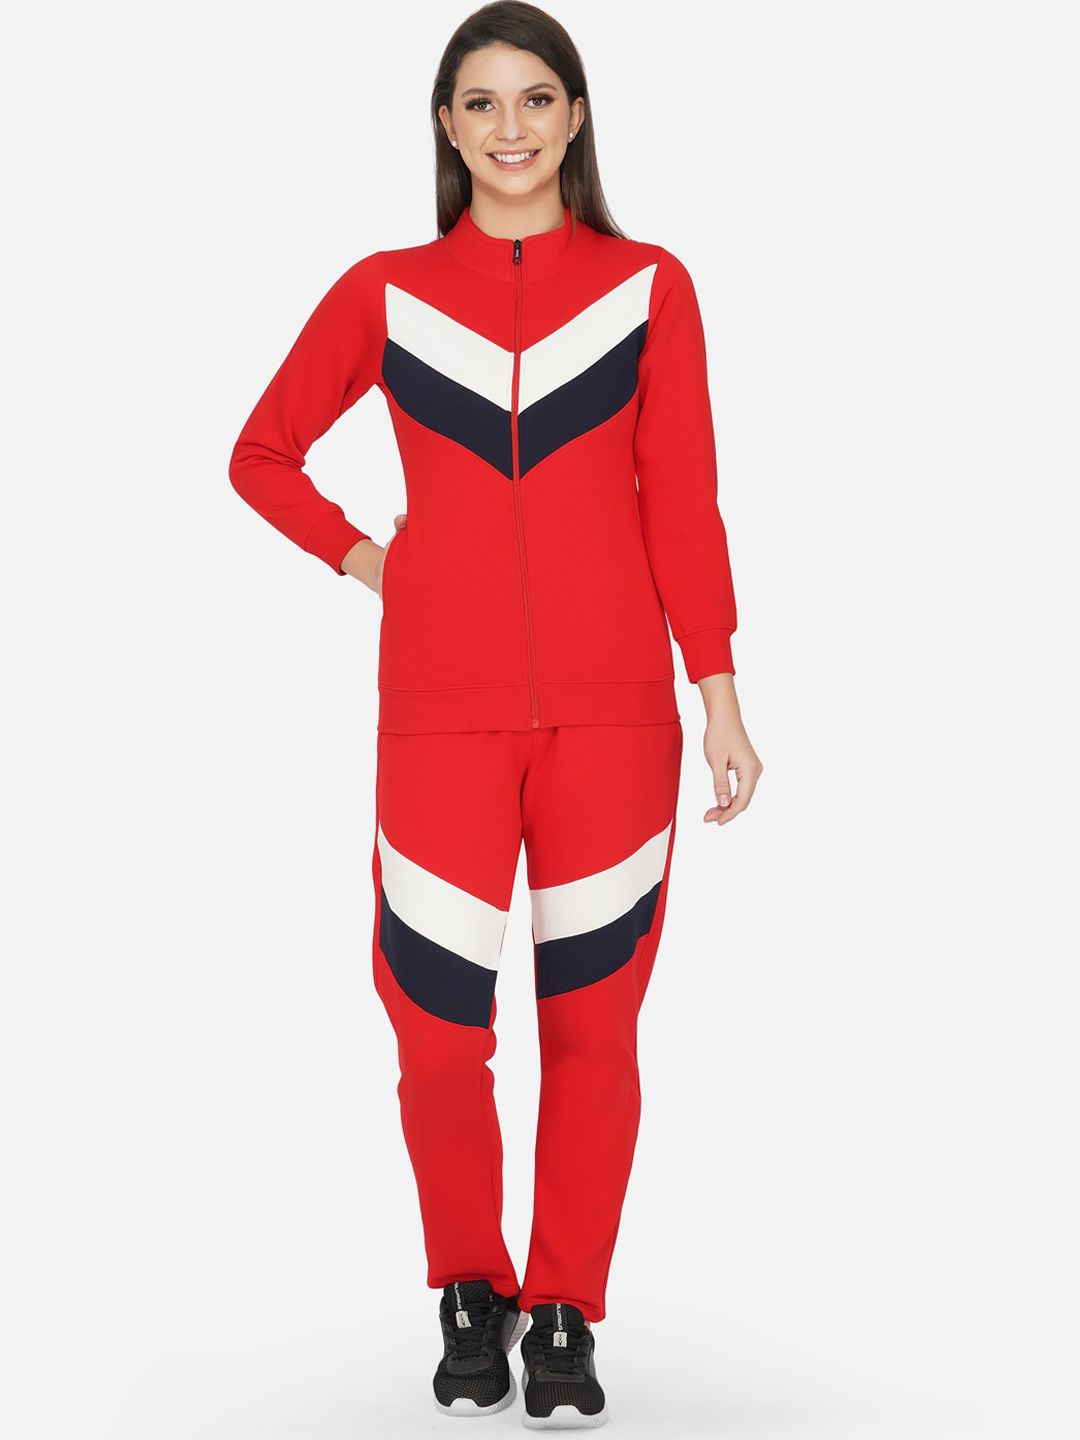 FABNEST Women Red & White Colourblocked Solid Track Suit Price in India